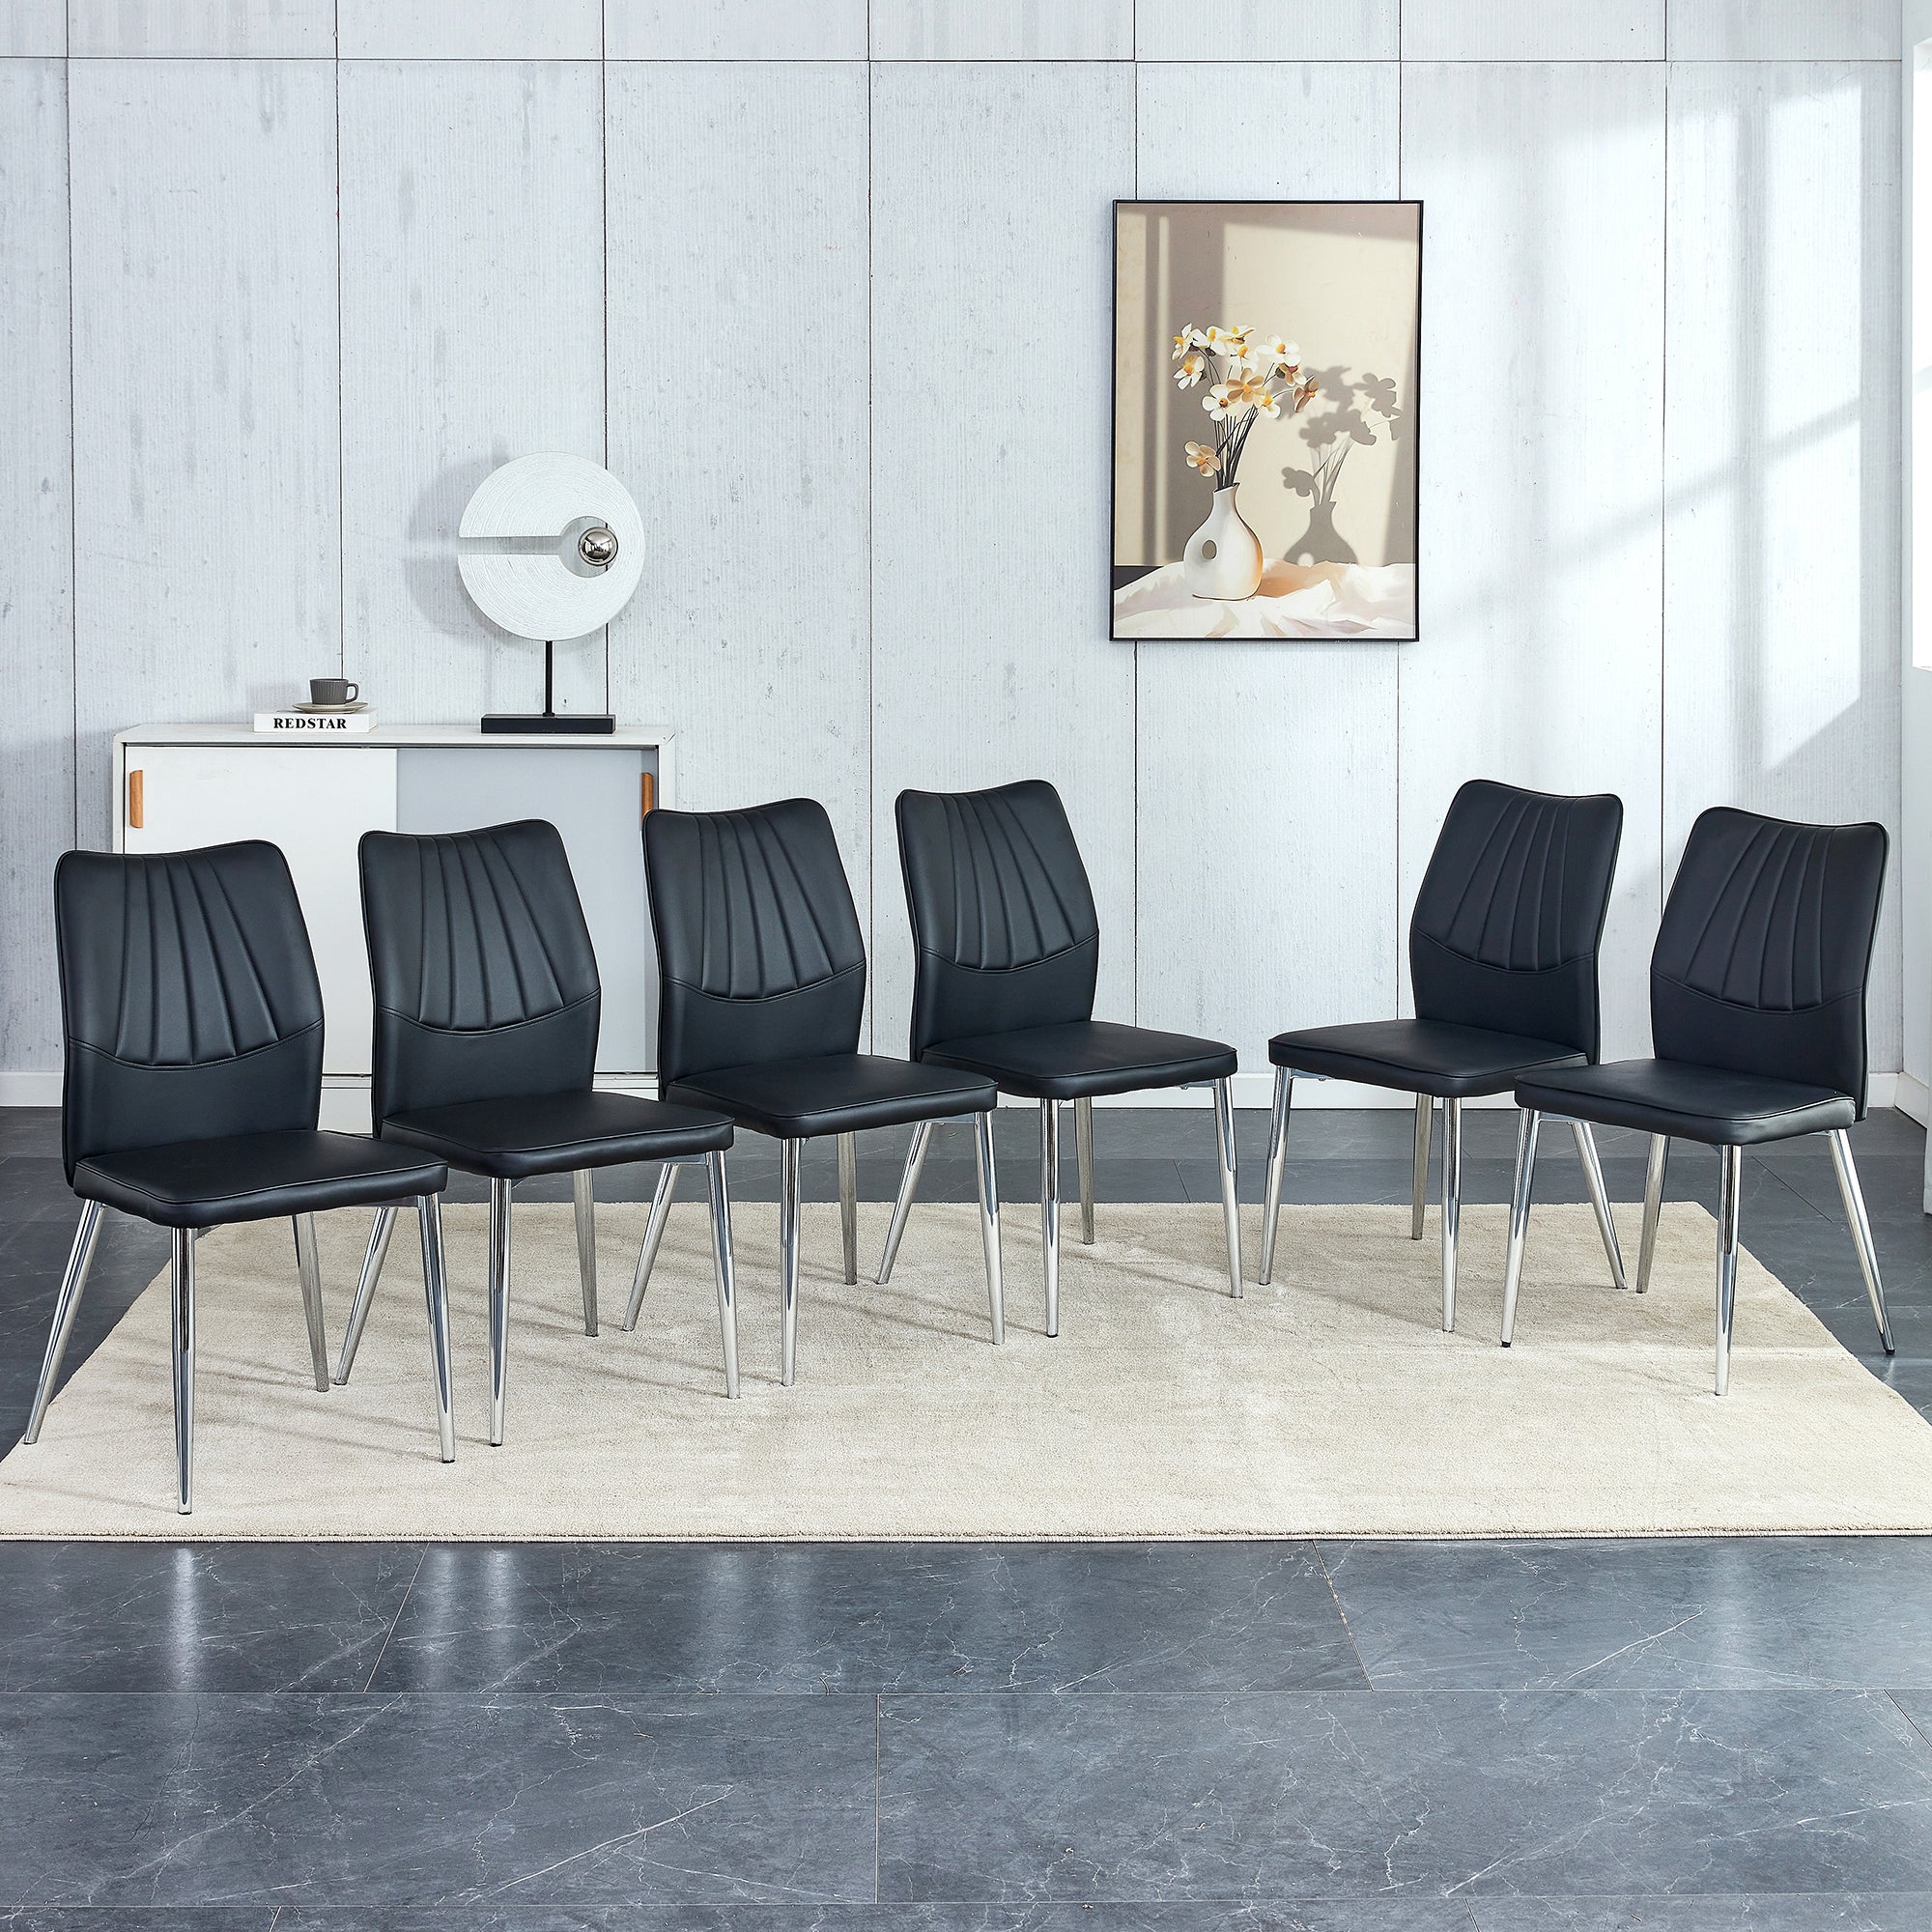 🆓🚛 6 Black Dining Chairs Modern Chairs From The Middle Ages Made of Pu Material Cushion & Silver Metal Legs Suitable for Restaurants & Living Rooms